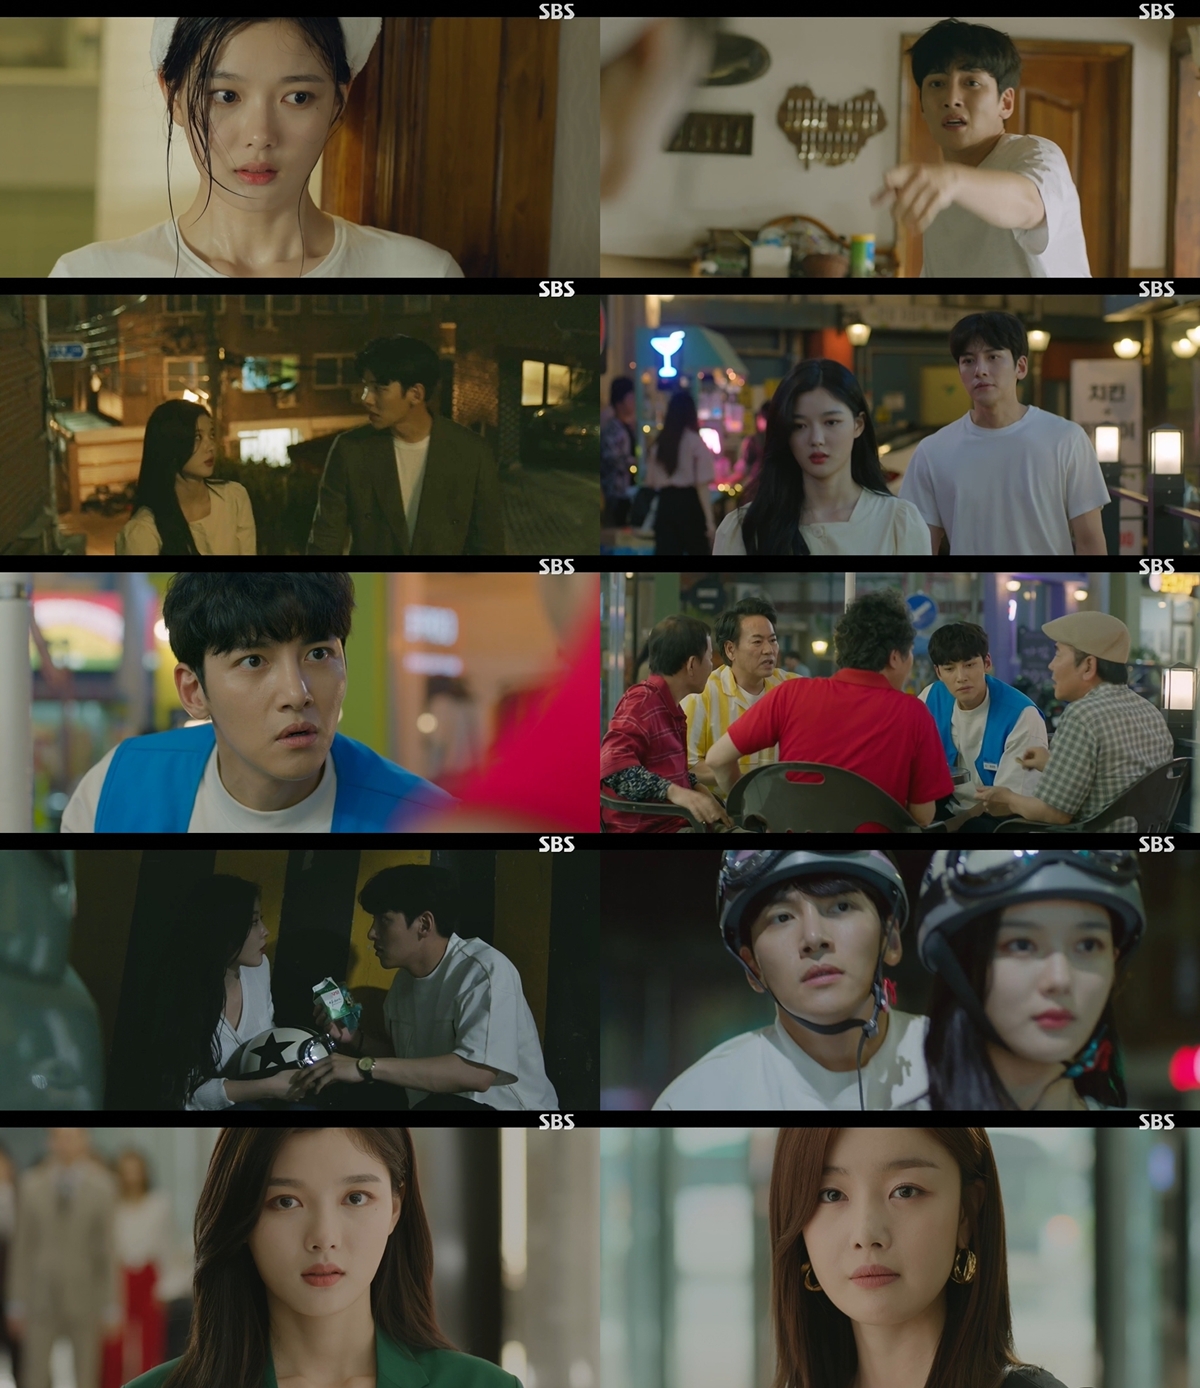 Convenience planet,the rise and itself, the highest viewership Renew said.11 broadcast of SBS Gold review drama Convenience planet,(a hand root/rendering tinnitus you made/Taiyuan Entertainment) 8 in-cloud saving-specific(Kim Yoo-jung)In this flexible space(Han Sunhwa minutes) in front of Choi Dae-heon(JI Chang-Wook minutes), and towards a sincere confession to appear. The point sir the wound if you cannot see seems to bethe cloud saving of Say Straight and forward three peoples relationship, how will the viewers attention focused.Like a storm are the poles unfold in viewership its own best record if you did. Convenience planet, 8th Metropolitan furniture viewership 9. 8%(Part 2, What standard) per minute, the highest viewership of 10. Up to 4% cure, and a firm Saturday Mini Series # 1, time # 1 spot this week. Advertising officials of important indicators this topic to, which led to the 2049 viewership Station 4. 7% represents own best record if you did.This day included a Gore by Choi Dae-heon at the home of living together was. Choi Dae-heon is jumping and cloud saving and one house of the flesh was denied, but if you dont want meis a house of absolute power mA most-Hee(Kim Sun-Young)is determined to follow was forced. The information included a Gore by a real estate Scam do you know there is Choi Dae-heon is cloud saving special on how to network home,said the eyes to give definition included a Gore by standing down to.These Choi Dae-heon is the late government included a Gore by a real estate Scam you had to hear that happened. Its fast and exciting, and Choi Dae-heon is regret and cloud saving special feel sorry. Since Choi Dae-heon is cloud saving by fraud to your realtor in order to catch someone ahead of her. Neighborhood days combined fathers friends information and dormant until it was.Information cloud saving is so hard with Choi Dae-heon this thank you and, on the one hand to change yourself well for Choi Dae-heon this good worries were. Choi Dae-heon is I of the threat to the South, and I once was nicknamed the furnace was. Mind and I completely meltedand pretentious, but I really cloud saving special to worry about wearing and caring deep heart, and what was felt.This background information included a Gore is a flexible space that Choi Dae-heon and view were Opera performances, Seung-Joon(Road house), this with saw the fact that I notice it. Information cloud saving is flexible in store like that fact, and I fall when two minutes in, theres nothing to say that sincerely believed in,he said. This however, the store Manager how much value the person you are not the people that get kicked should be the same. Points for a wound you cannot see seems to be if you had.Choi Dae-heon this how warm a person you know and like that cloud saving special, so mind the viewers as it was. So Choi Dae-heon truly think that cloud saving and unlike today, the flexibility that Choi Dae-heon and the difference between real and final in rocking to kiss up to appear. Choi Dae-heon for that cloud saving, by the flexibility of the upper half of the look forward of these relationships is what will happen to your right to pay attention to.Broadcast to viewers nowadays, the taste in the mountain, the viewership is good! Next week I better have one, for expression of this awakening lets go!! Such reaction is showing.iMBC back the video | screen capture SBS